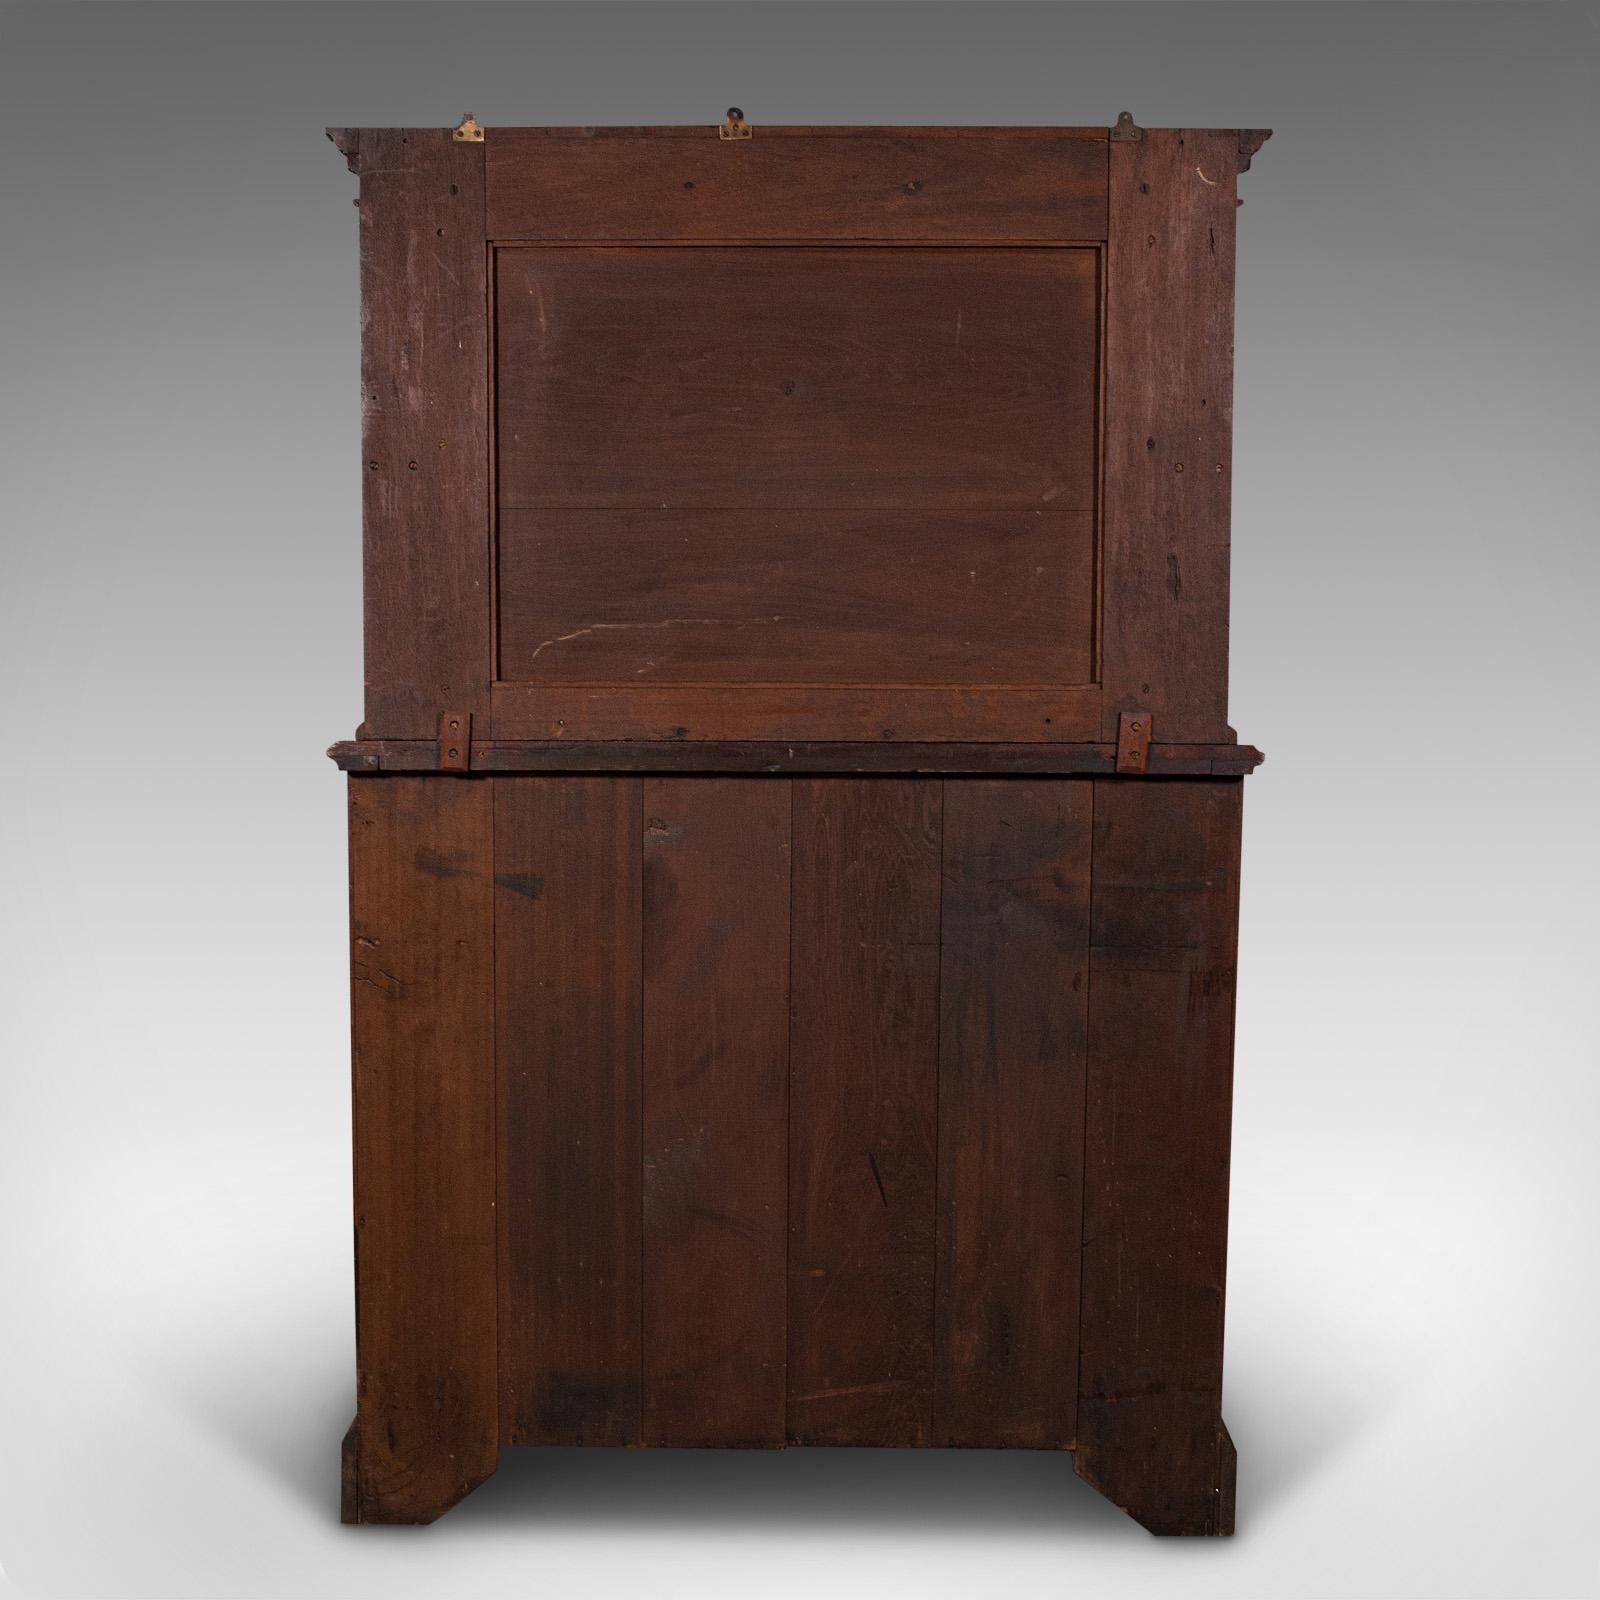 Antique Secretaire Sideboard, English, Correspondence Cabinet, Victorian, C.1900 For Sale 1